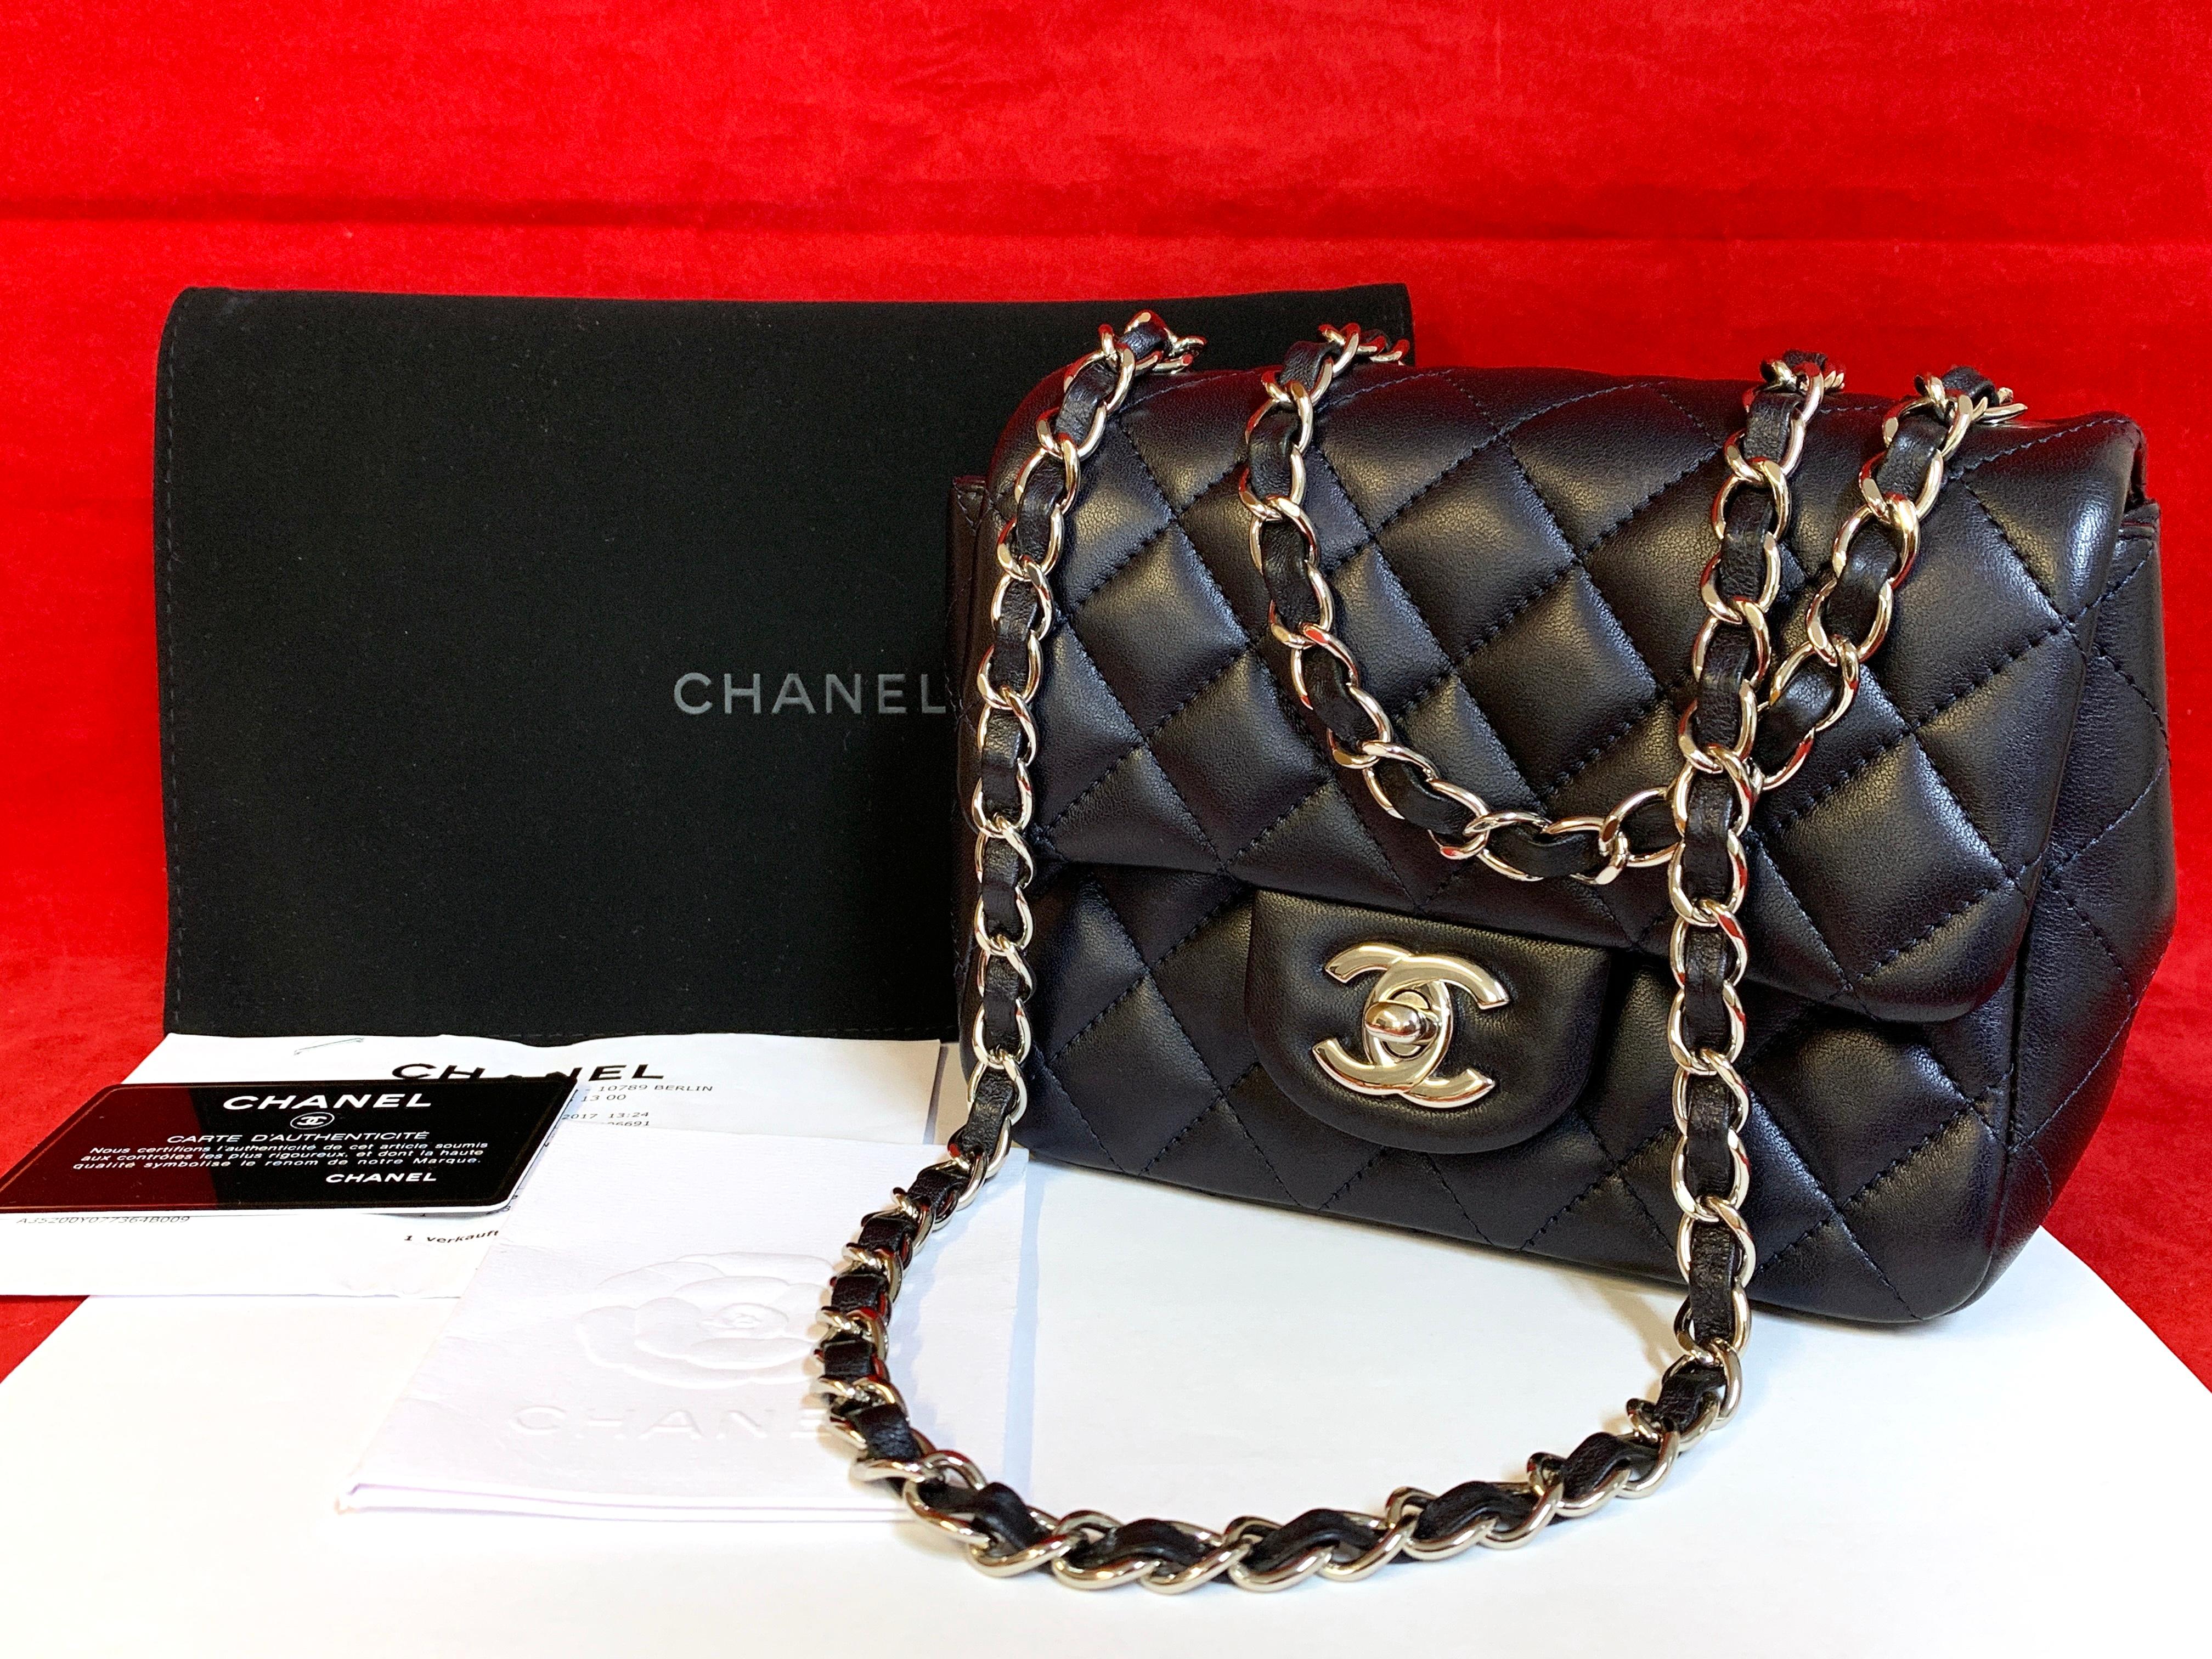 CHANEL mini flap Bag square made of navy blue quilted lambskin.

The bag is in a very good condition and has minimal signs of use.

The delivery includes:
- Chanel mini flap bag 
- Dustbag
- Original CHANEL bill of 2017
- warranty